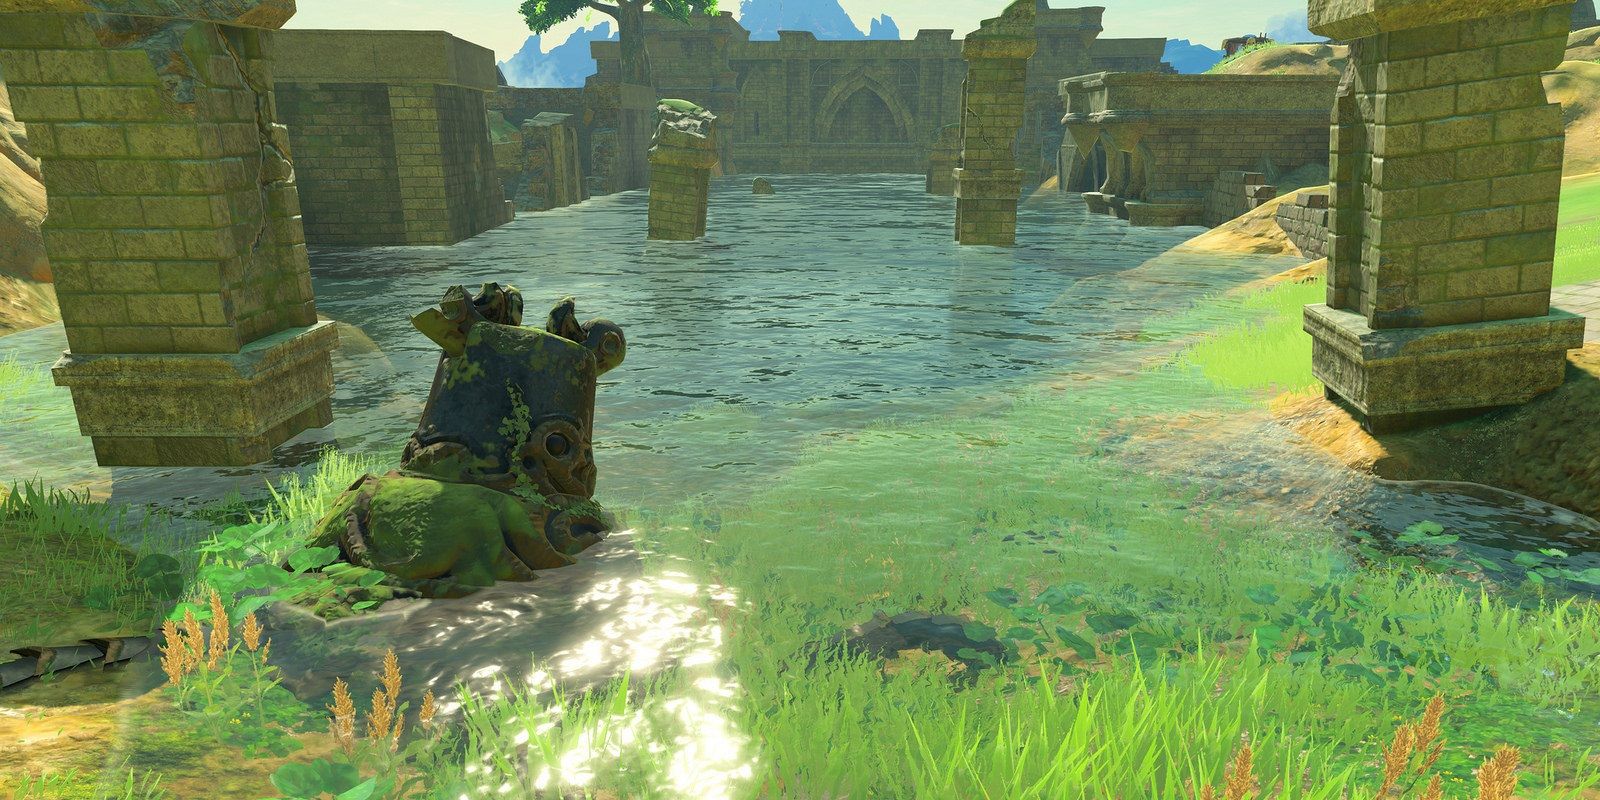 The open world of Breath of the Wild